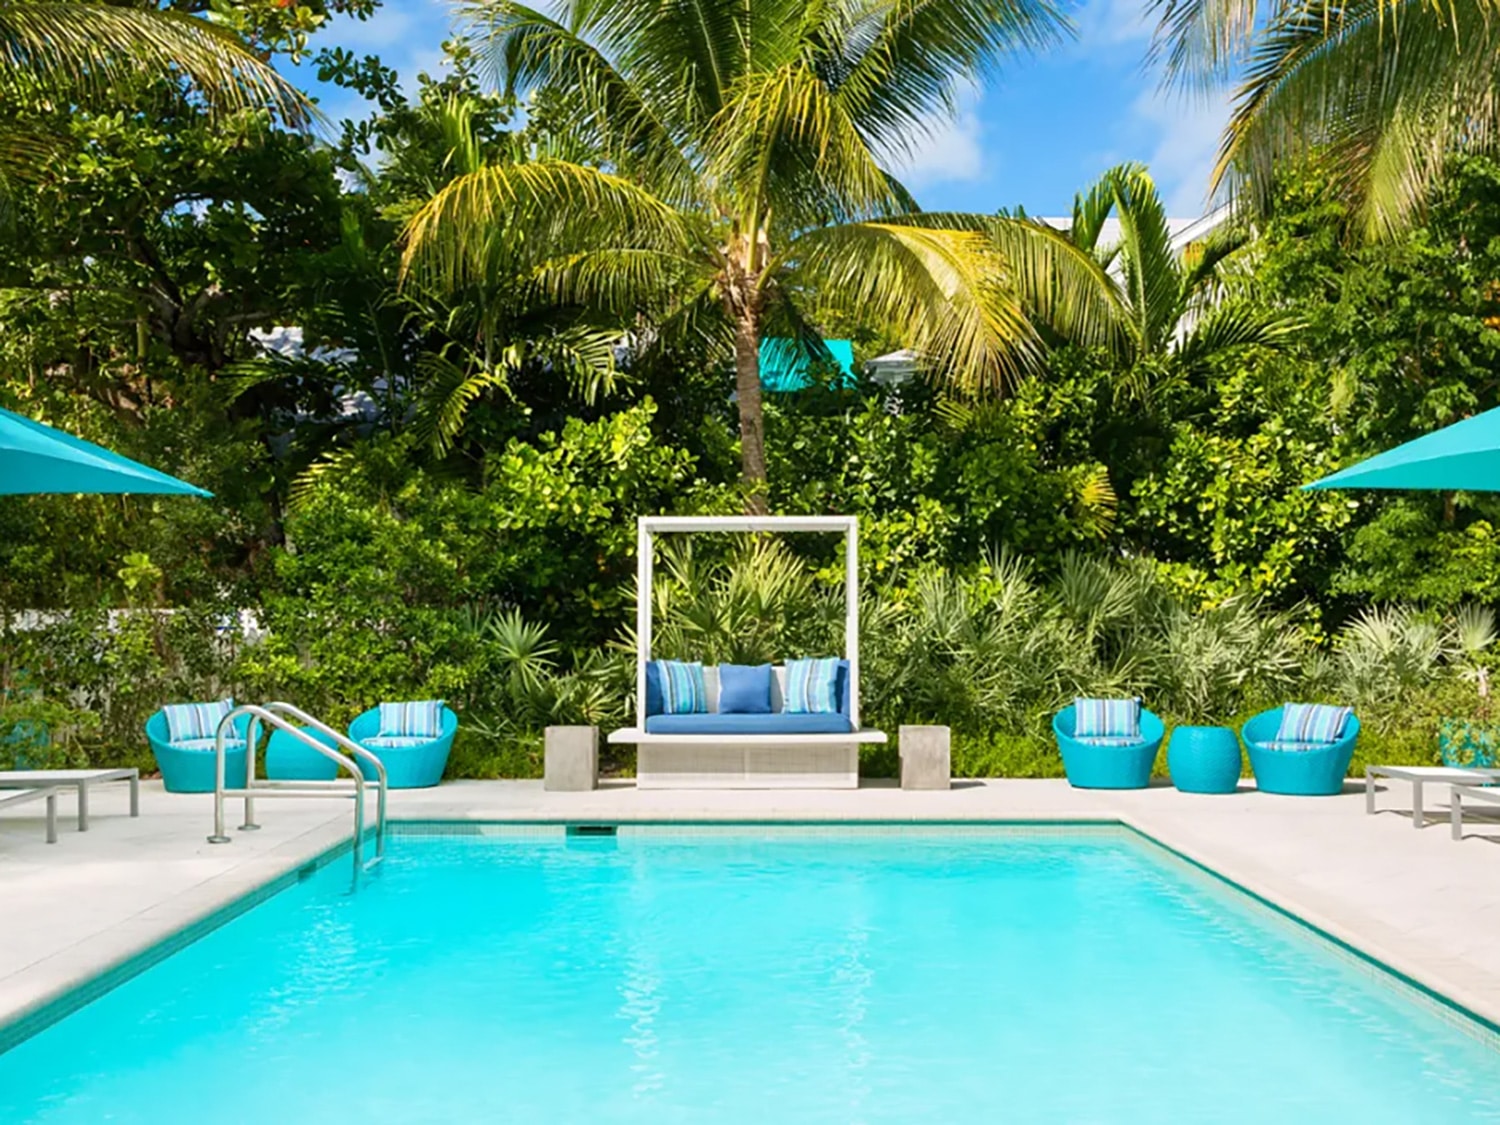 The pool at the Marker Key West Resort in Florida.